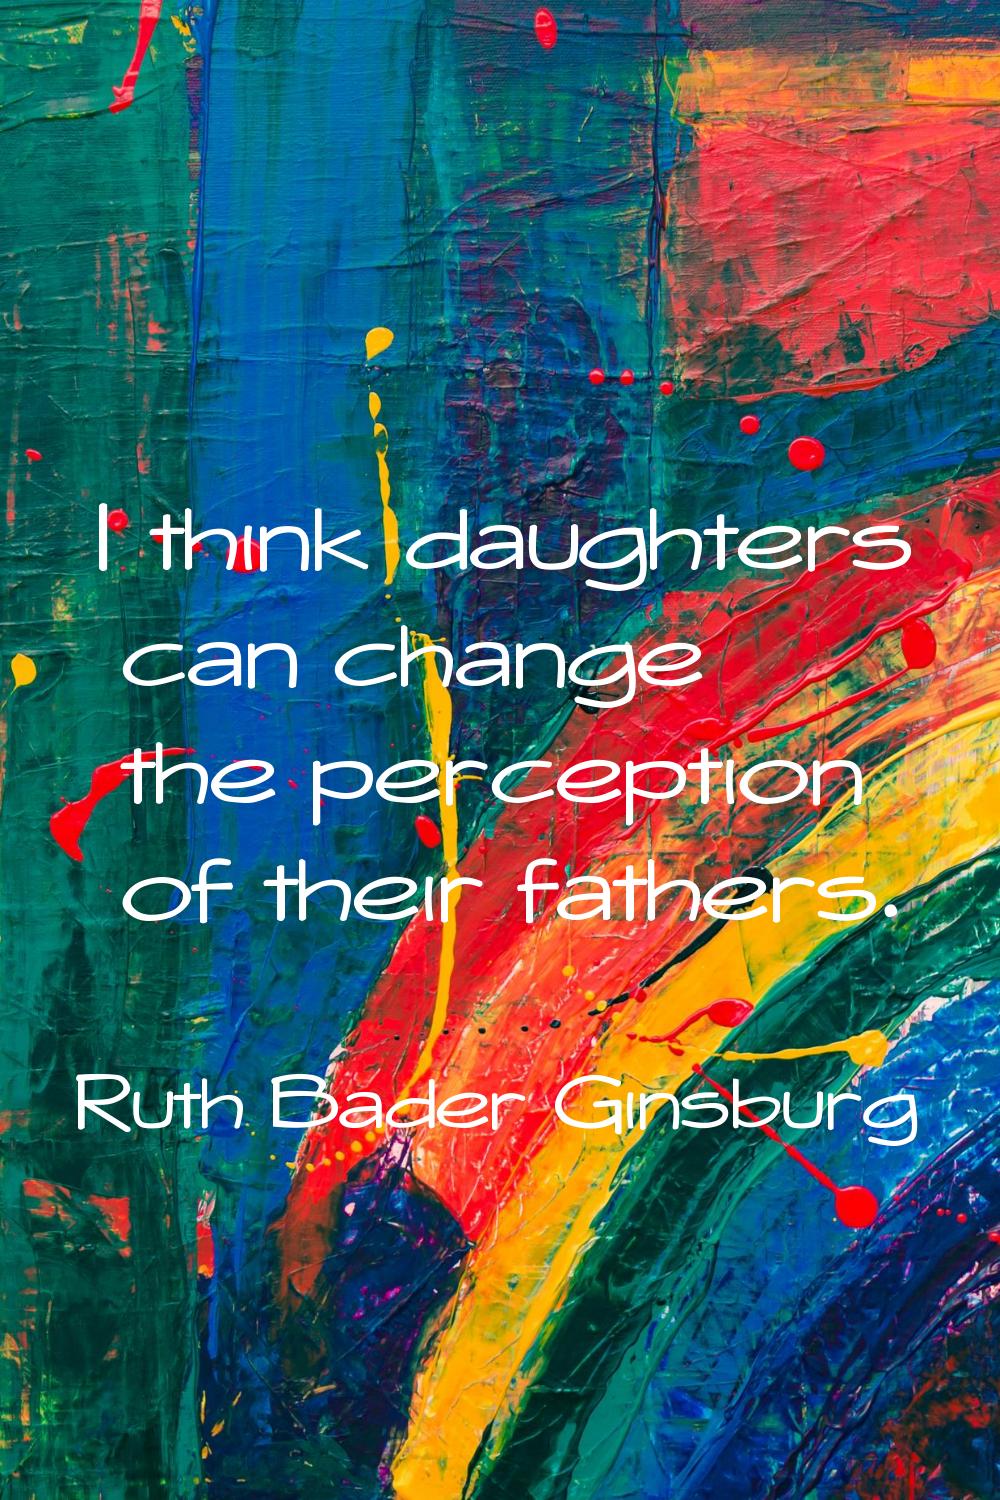 I think daughters can change the perception of their fathers.